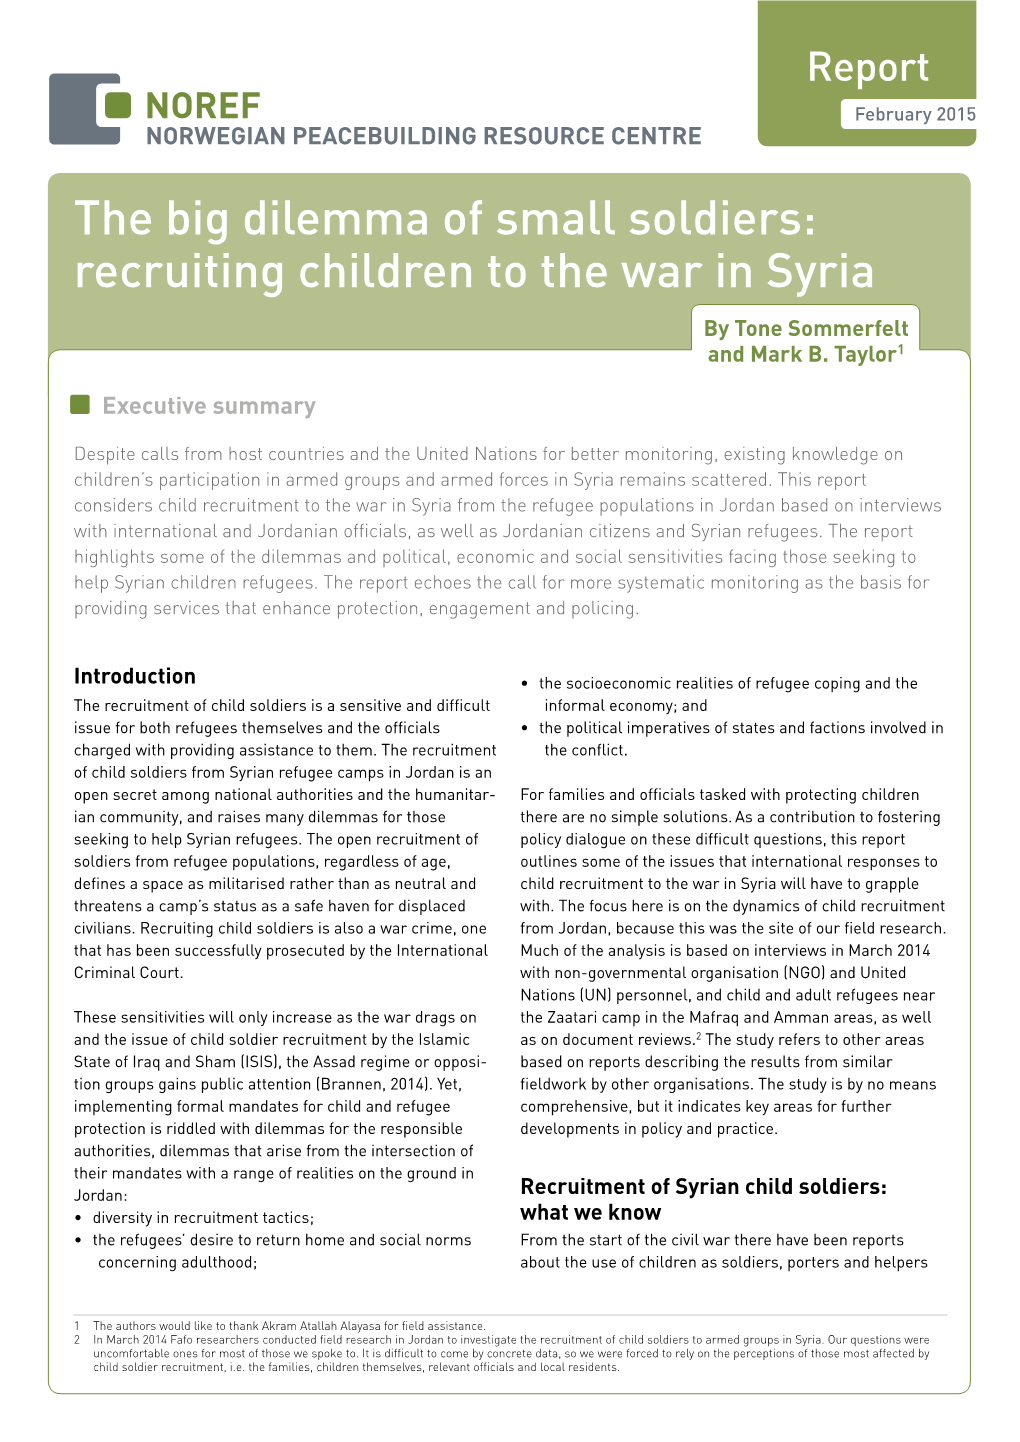 The Big Dilemma of Small Soldiers: Recruiting Children to the War in Syria